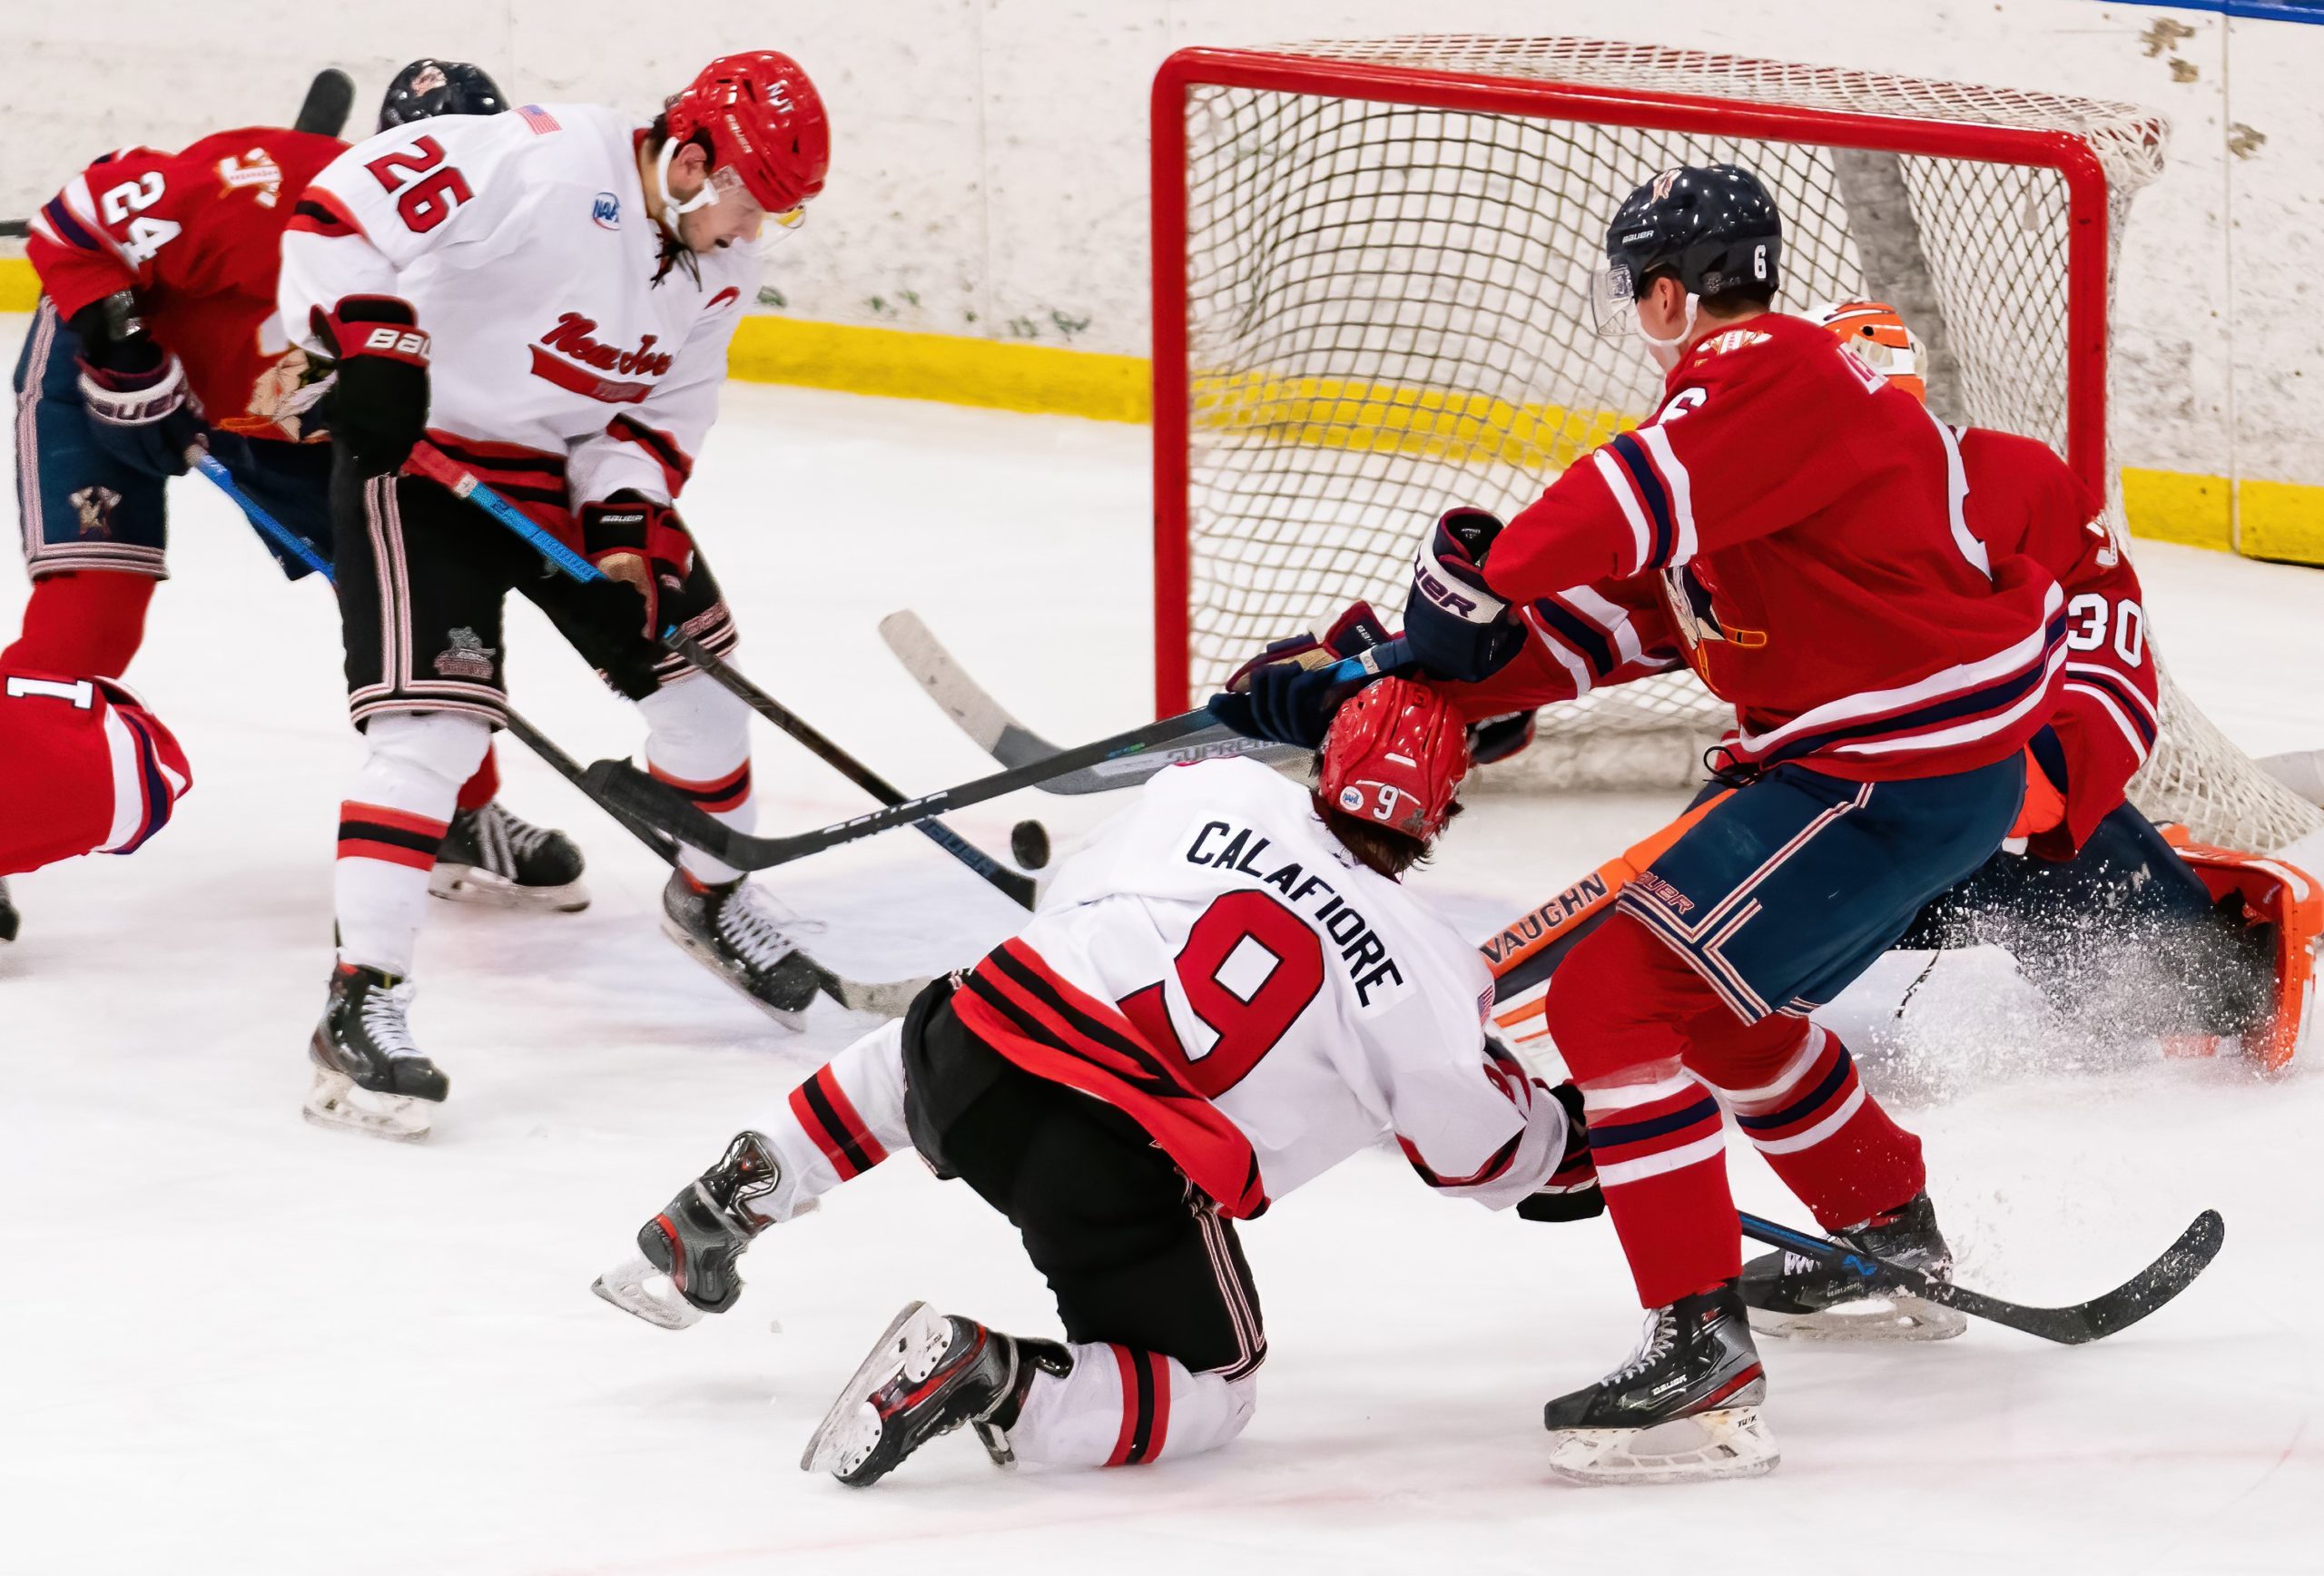 Suede’s goal with 0:06.8 in game gives Titans 6 – 5 win over Tomahawks